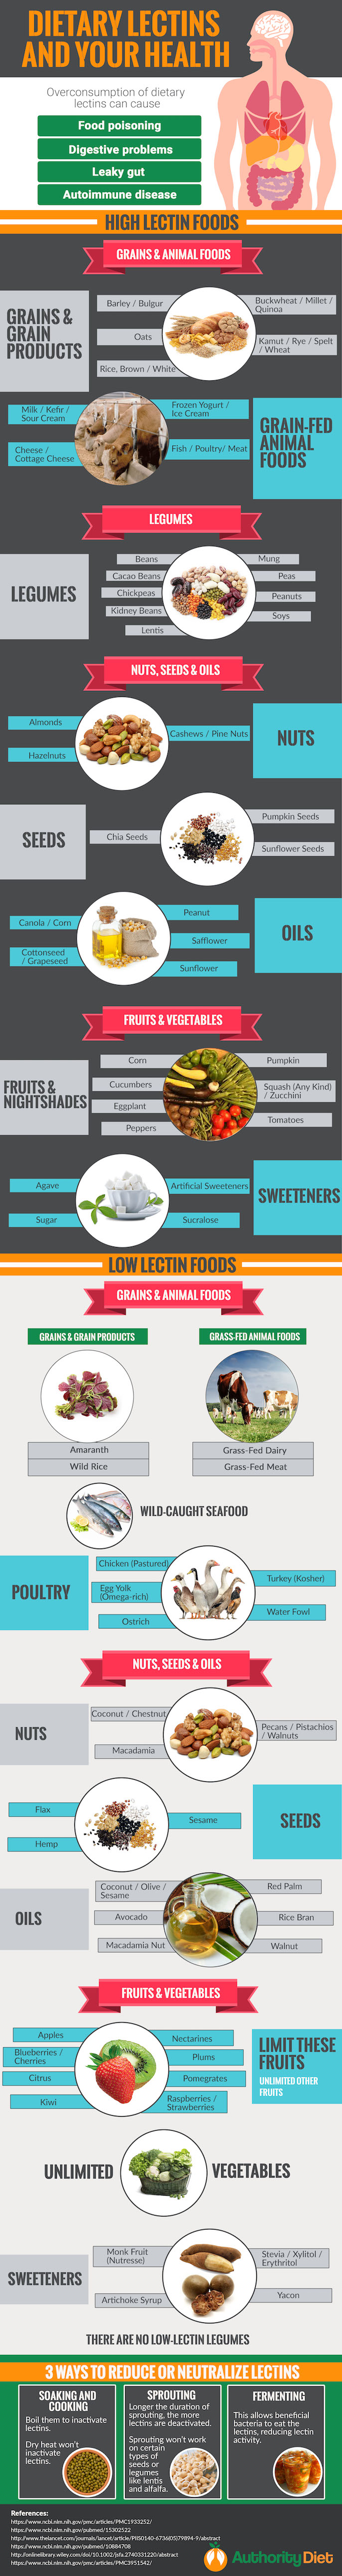 Lectin Infographic: What foods are high in lectins. Avoid these foods if you want to be healthier and lose more weight.